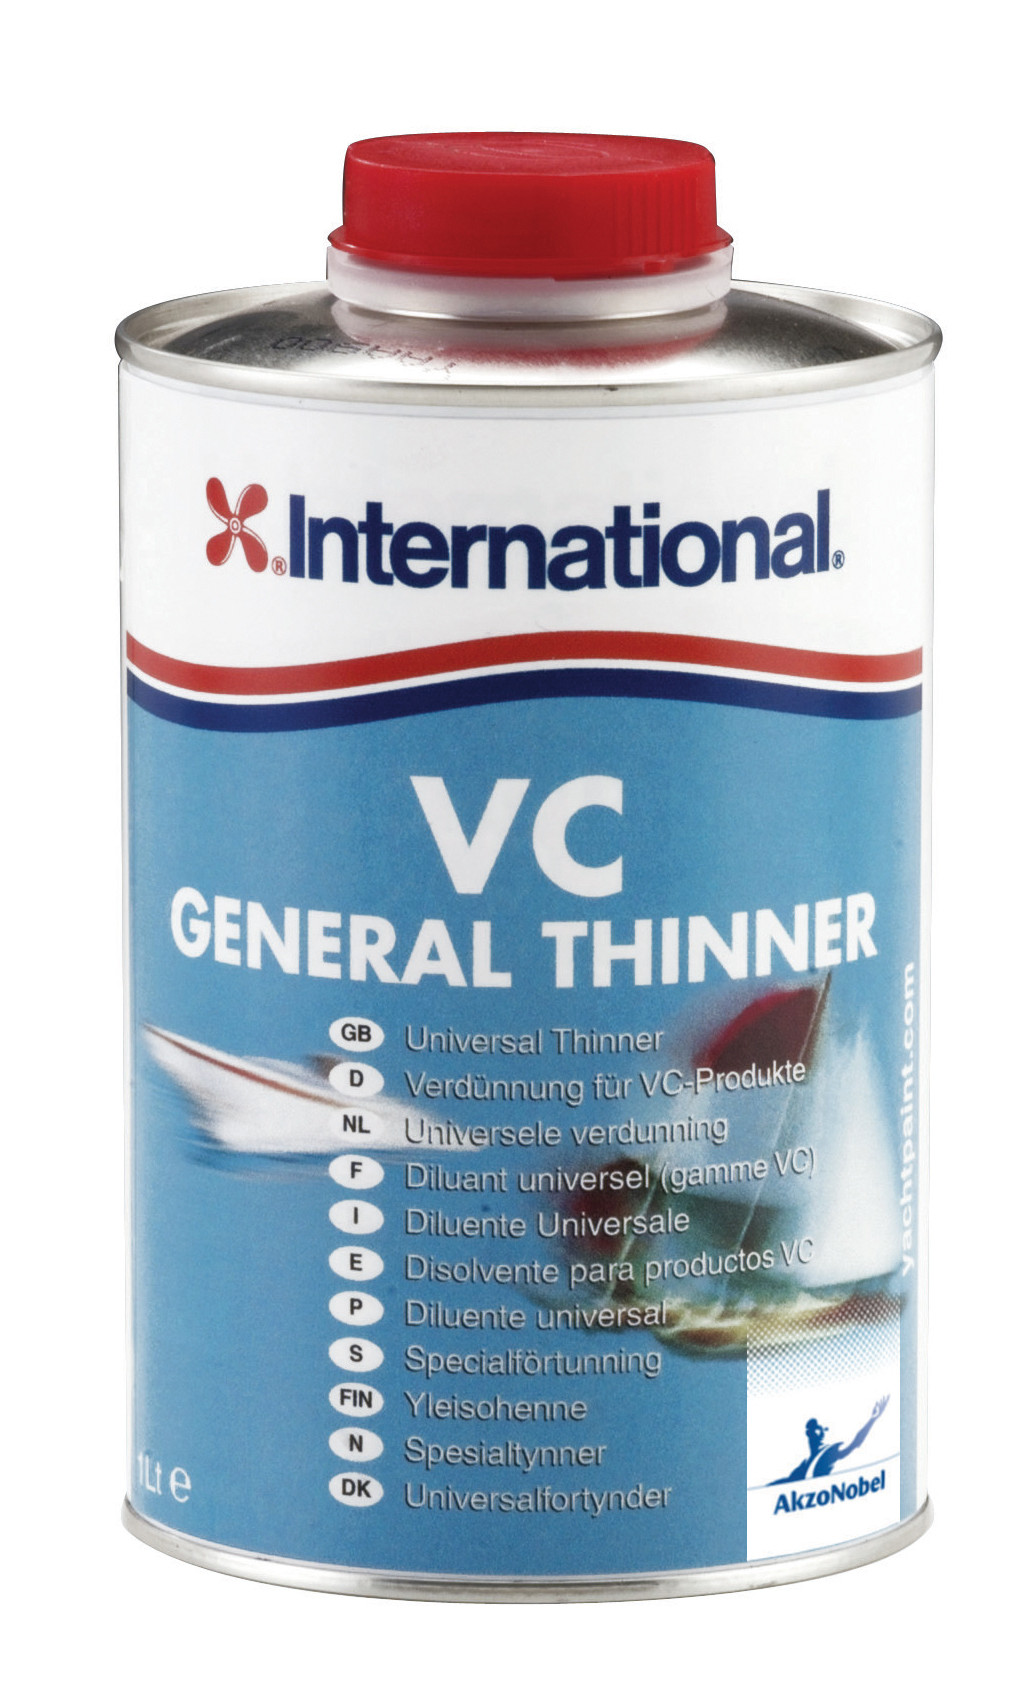 VC General Thinner, 1 litre